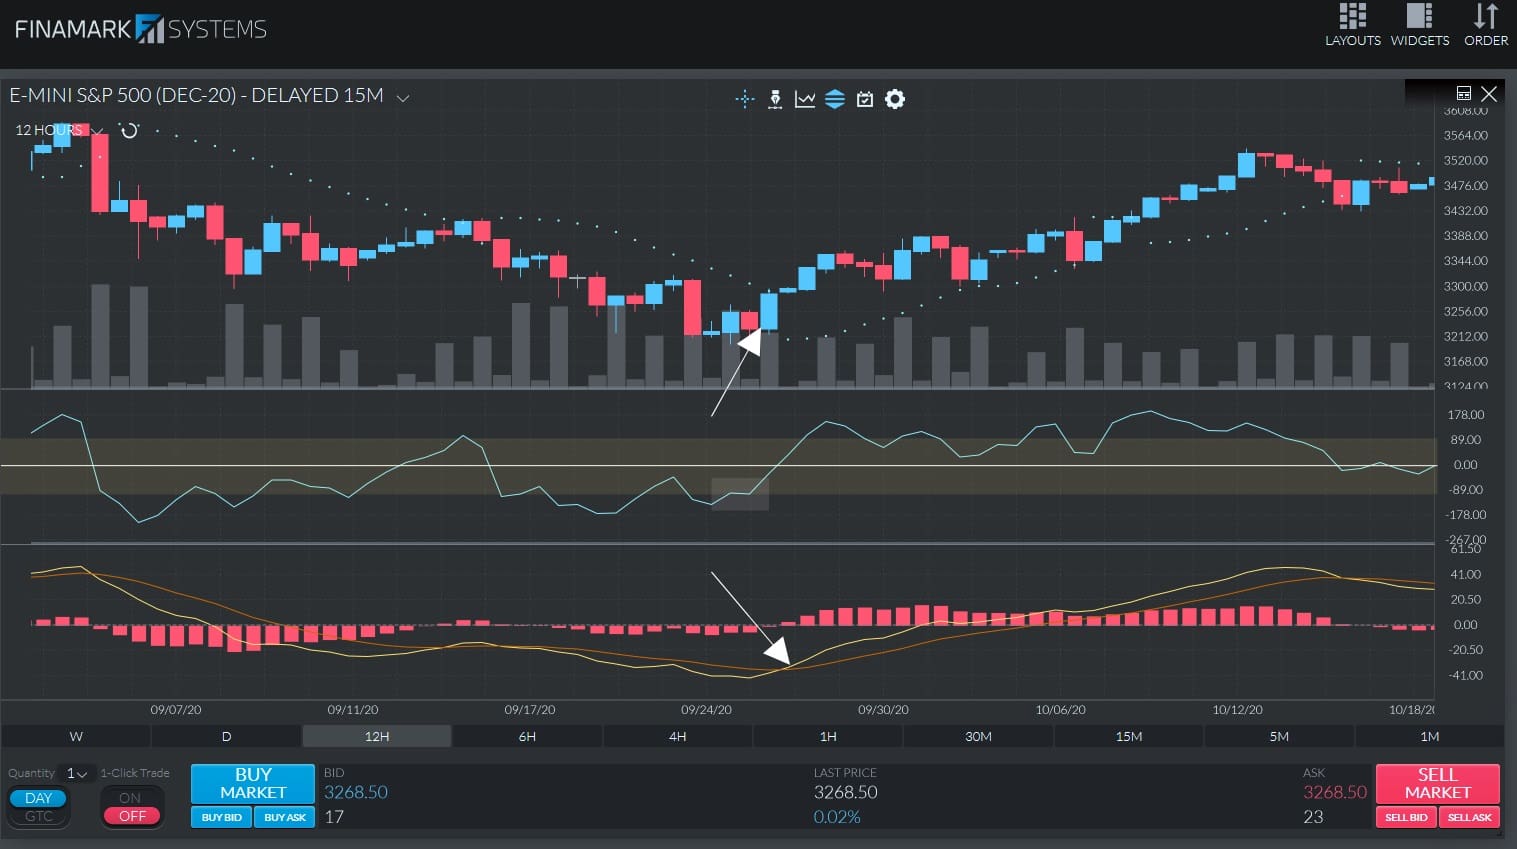 An example of combining the CCI with the MACD and Parabolic SAR to confirm a buy signal